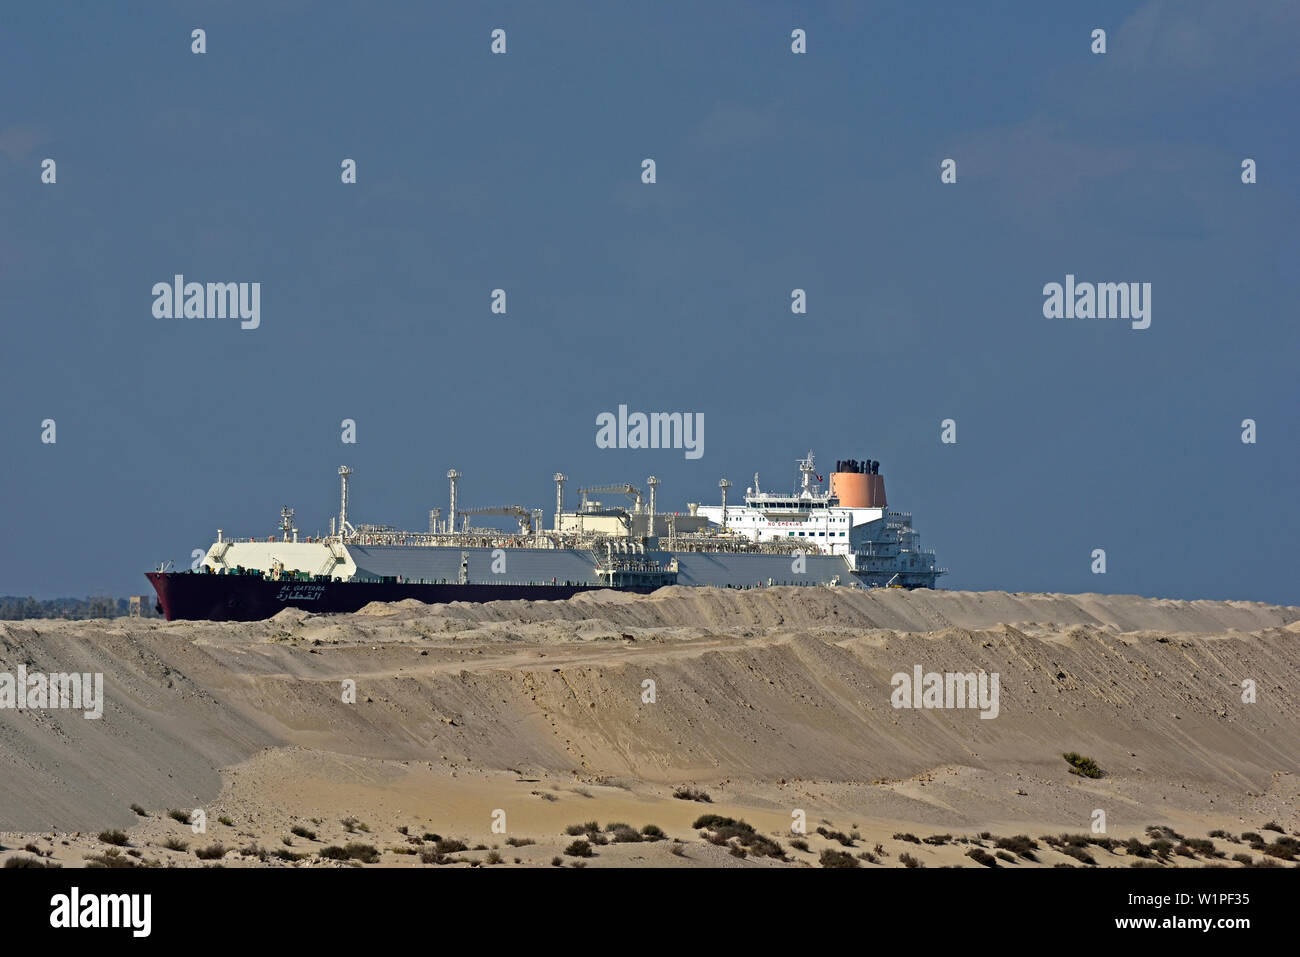 suez canal, egypt - 2015.12.01:  liquified natural gas lng carrier al gattara ( imo no 9337705 ) transiting the suez canal southbound near  km 56 Stock Photo